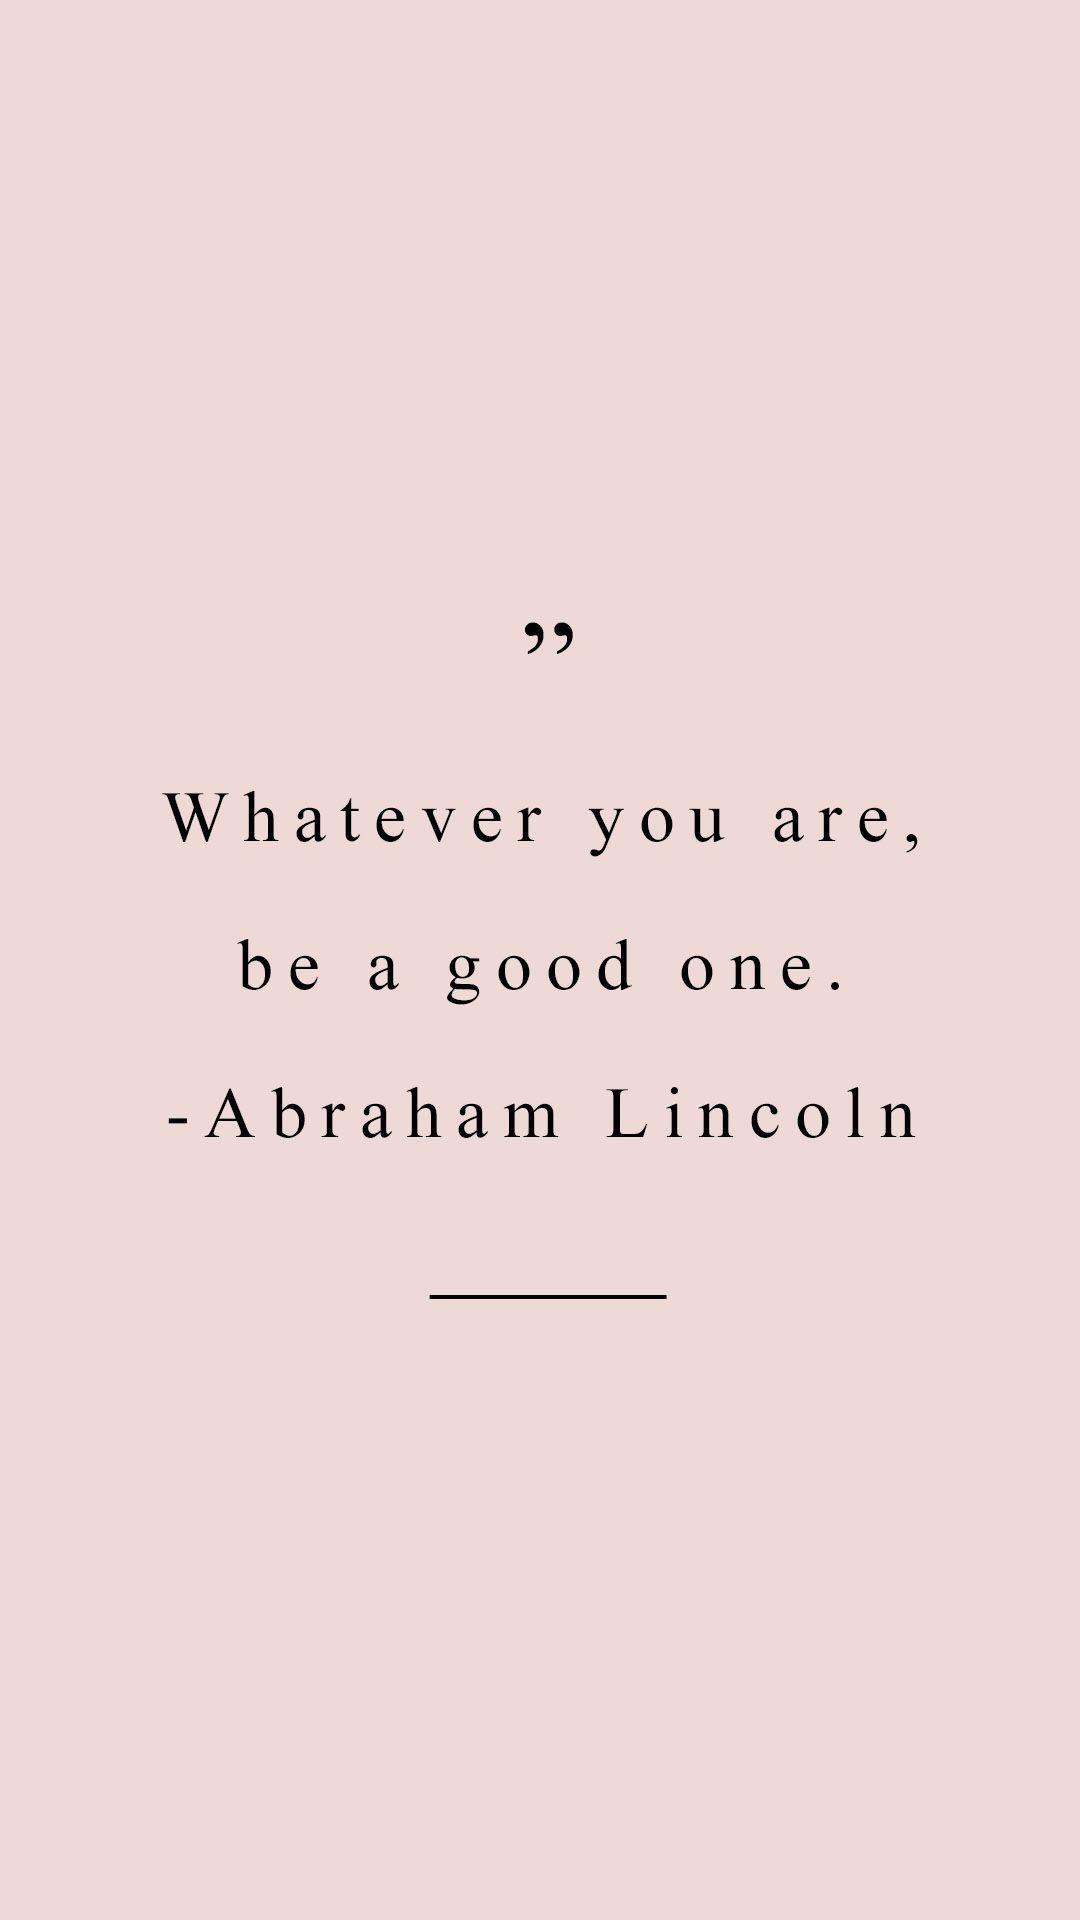 Whatever you are be a good one Lincoln quote